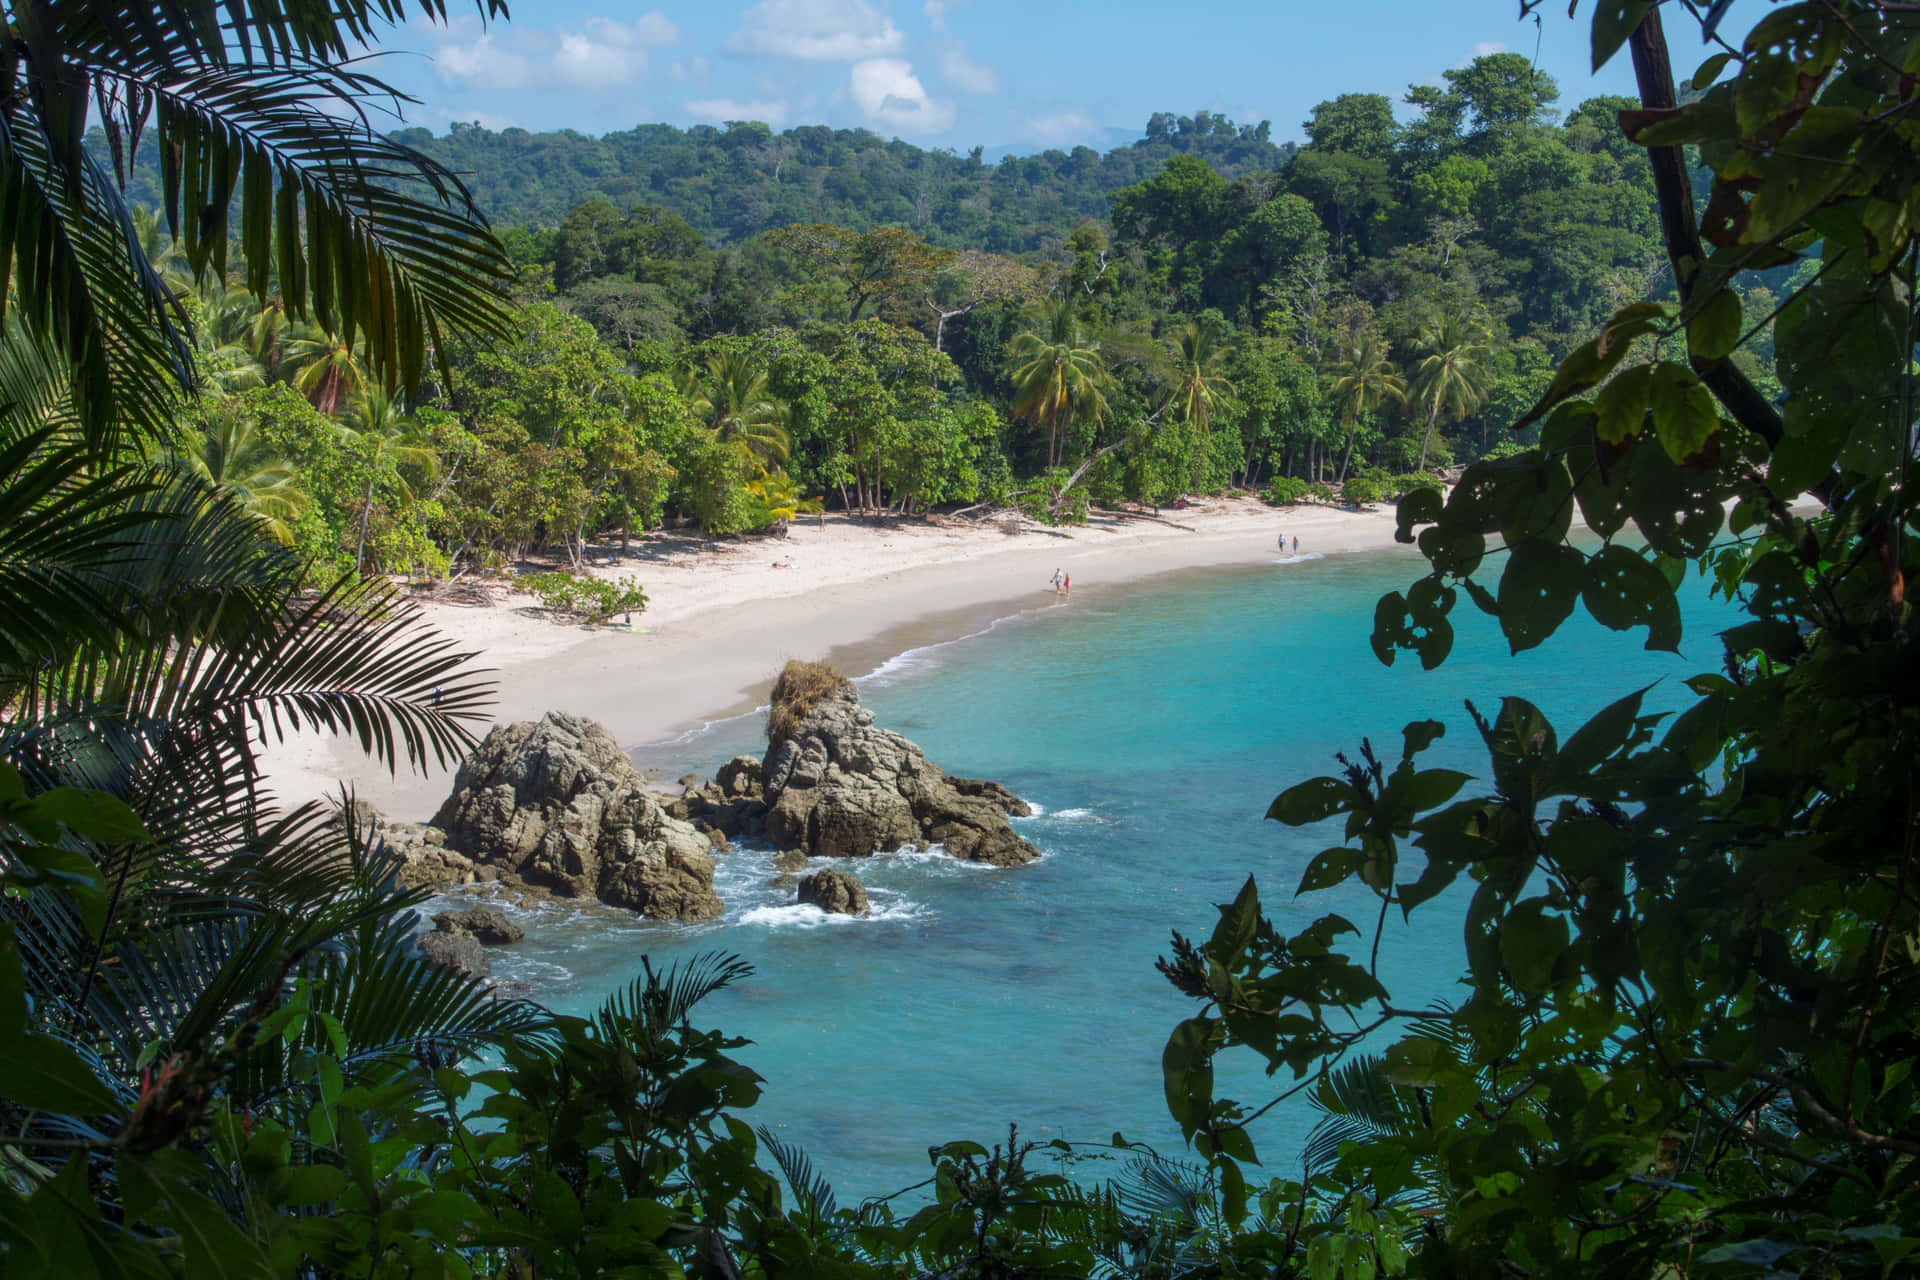 "Experience the beauty of the rainforest in Costa Rica"